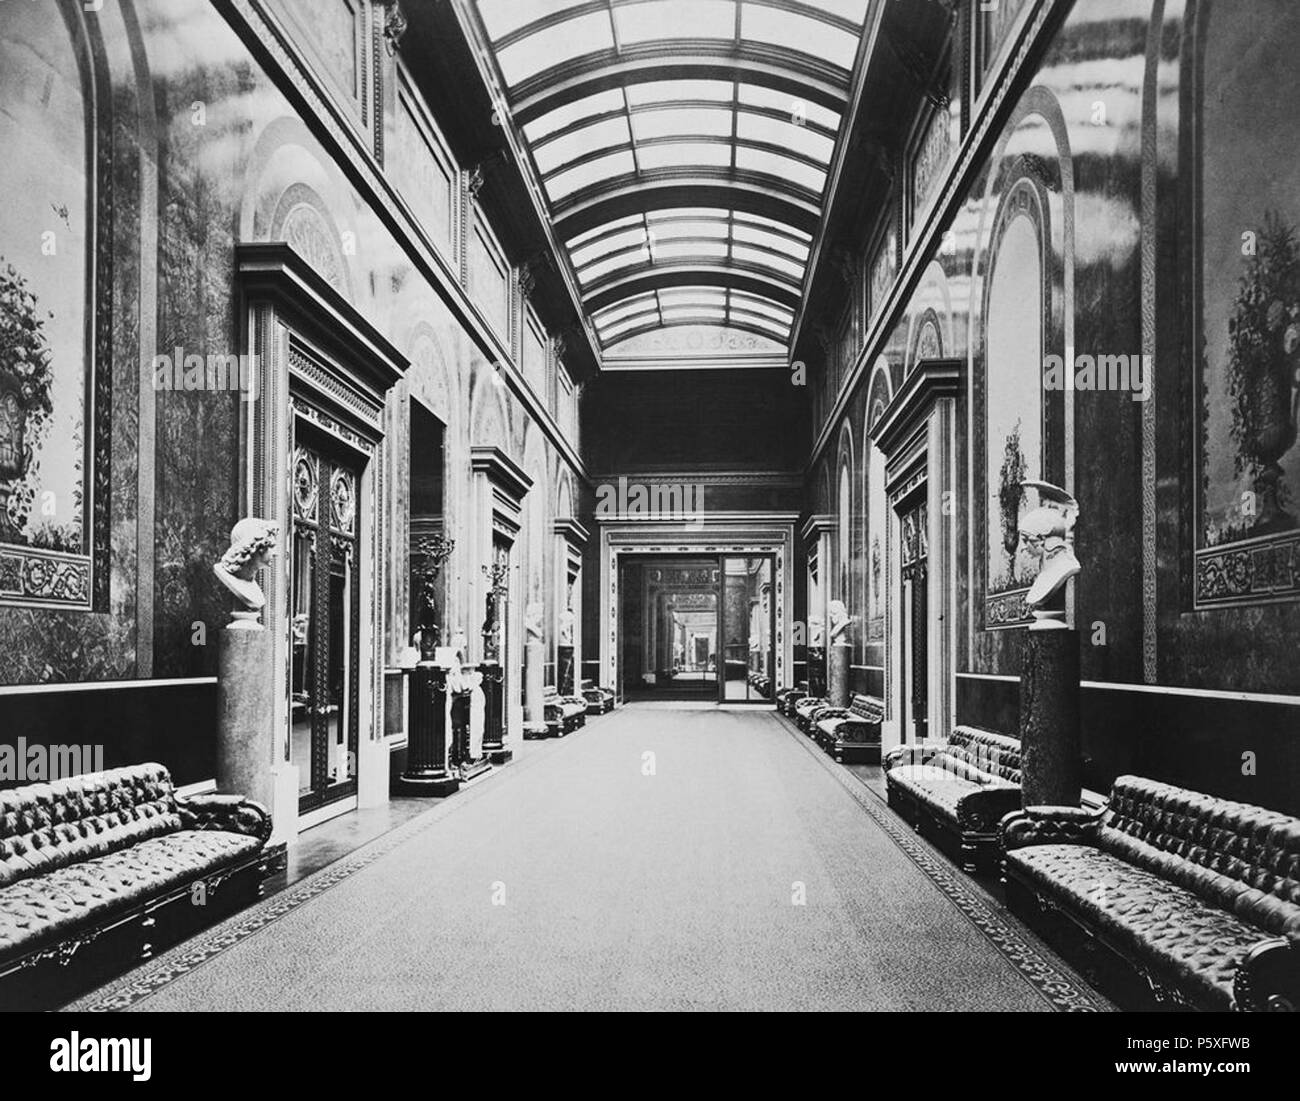 N/A. Inglese: Galleria Est . 1873. Colline & Saunders 491 East Gallery e Buckingham Palace, 1873 Foto Stock